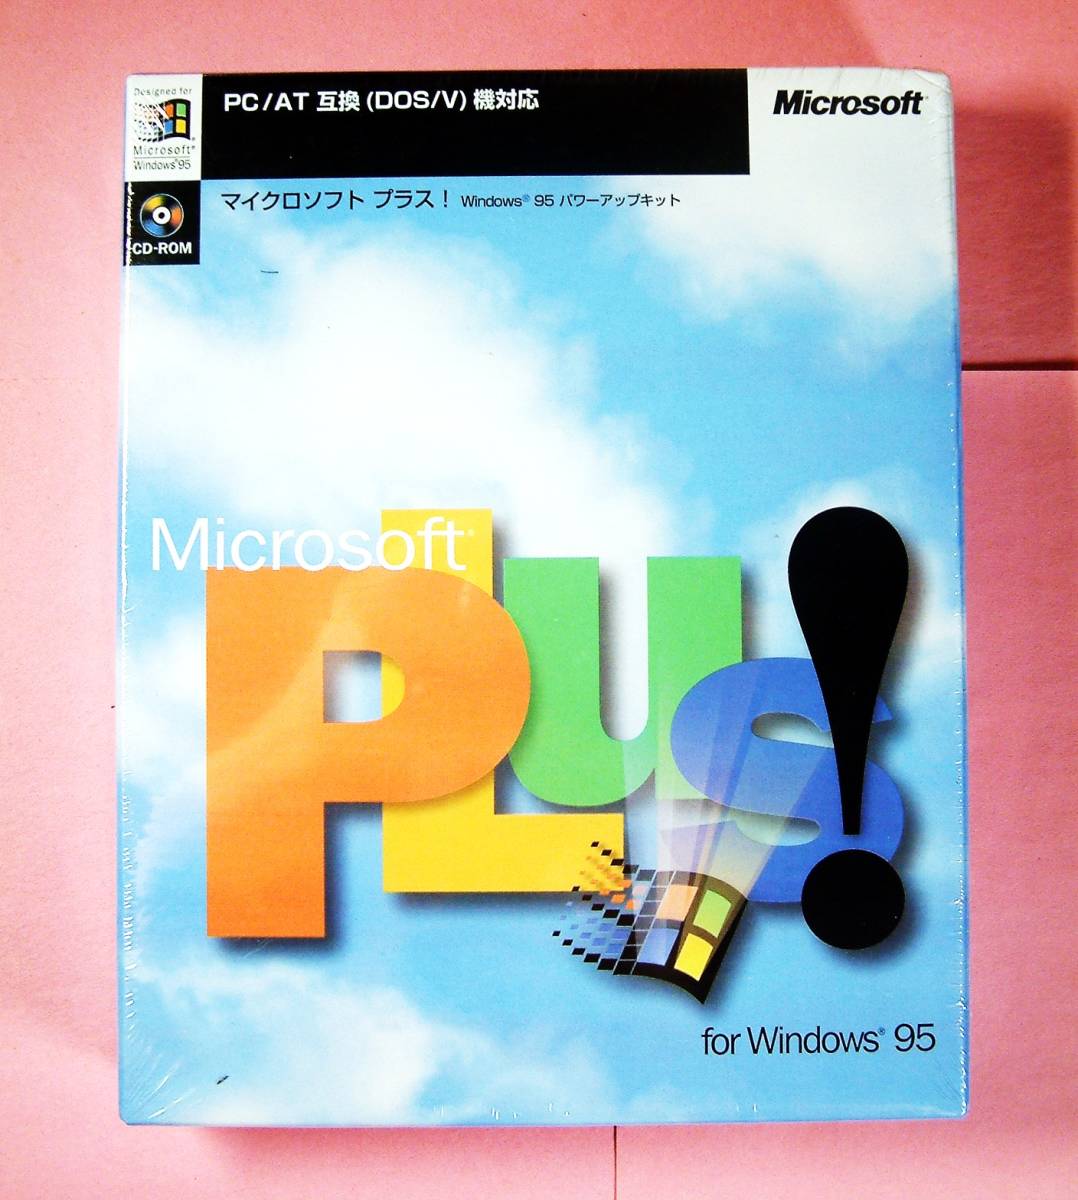 【4137】Microsoft Plus! for Windows 95 PC/AT互換機(DOS/V)用 CD-ROM版 新品 マイクロソフト プラス パワーアップキット 4988648021532_画像1